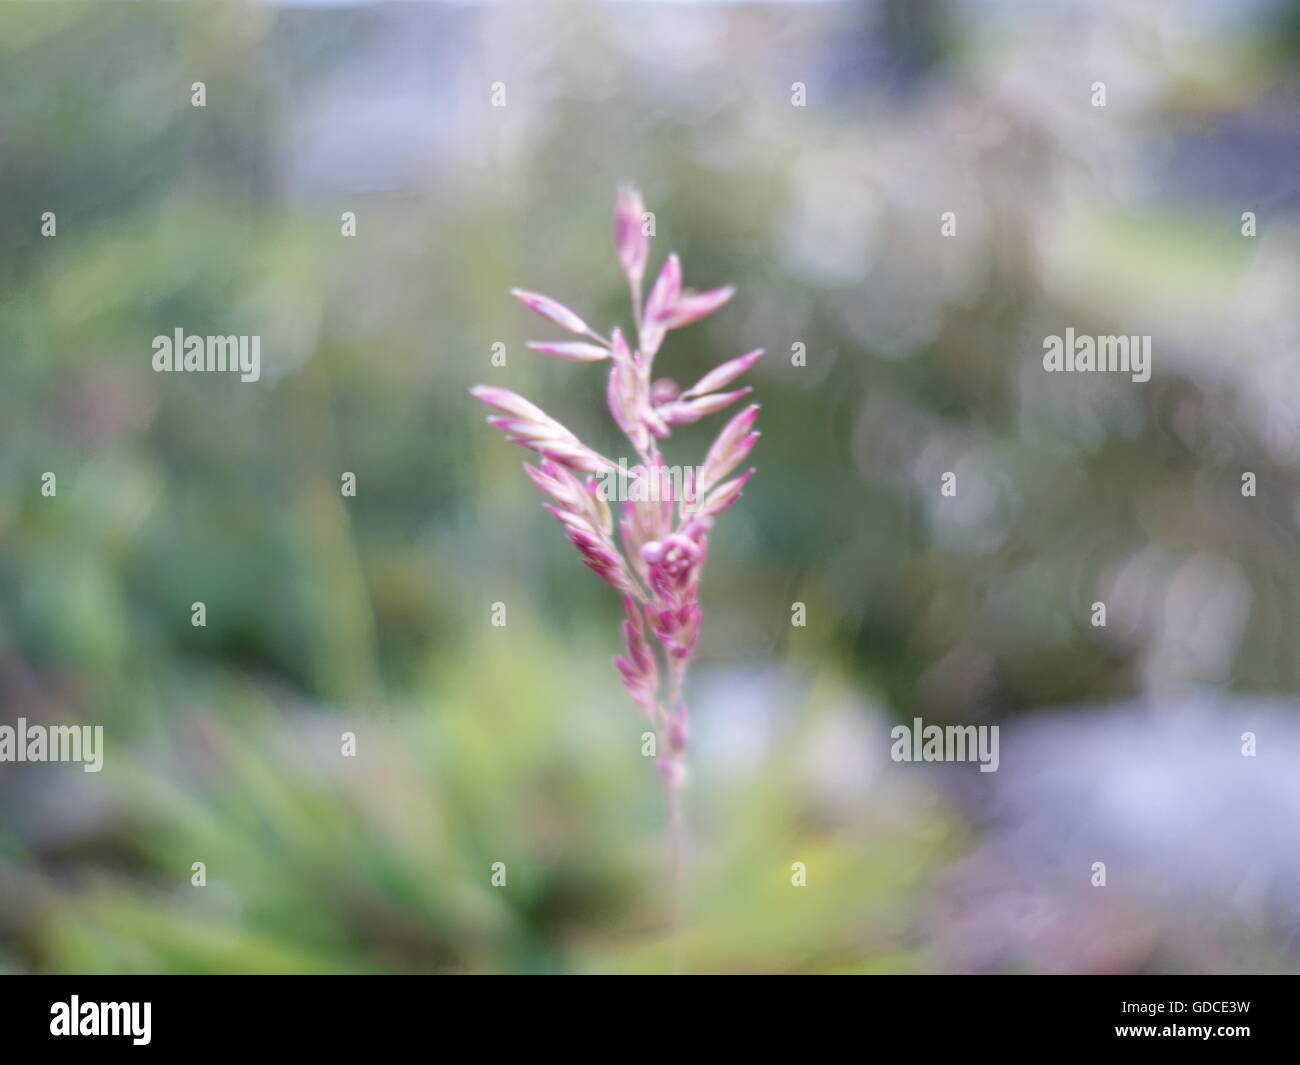 A sprig of foxtail grass Stock Photo